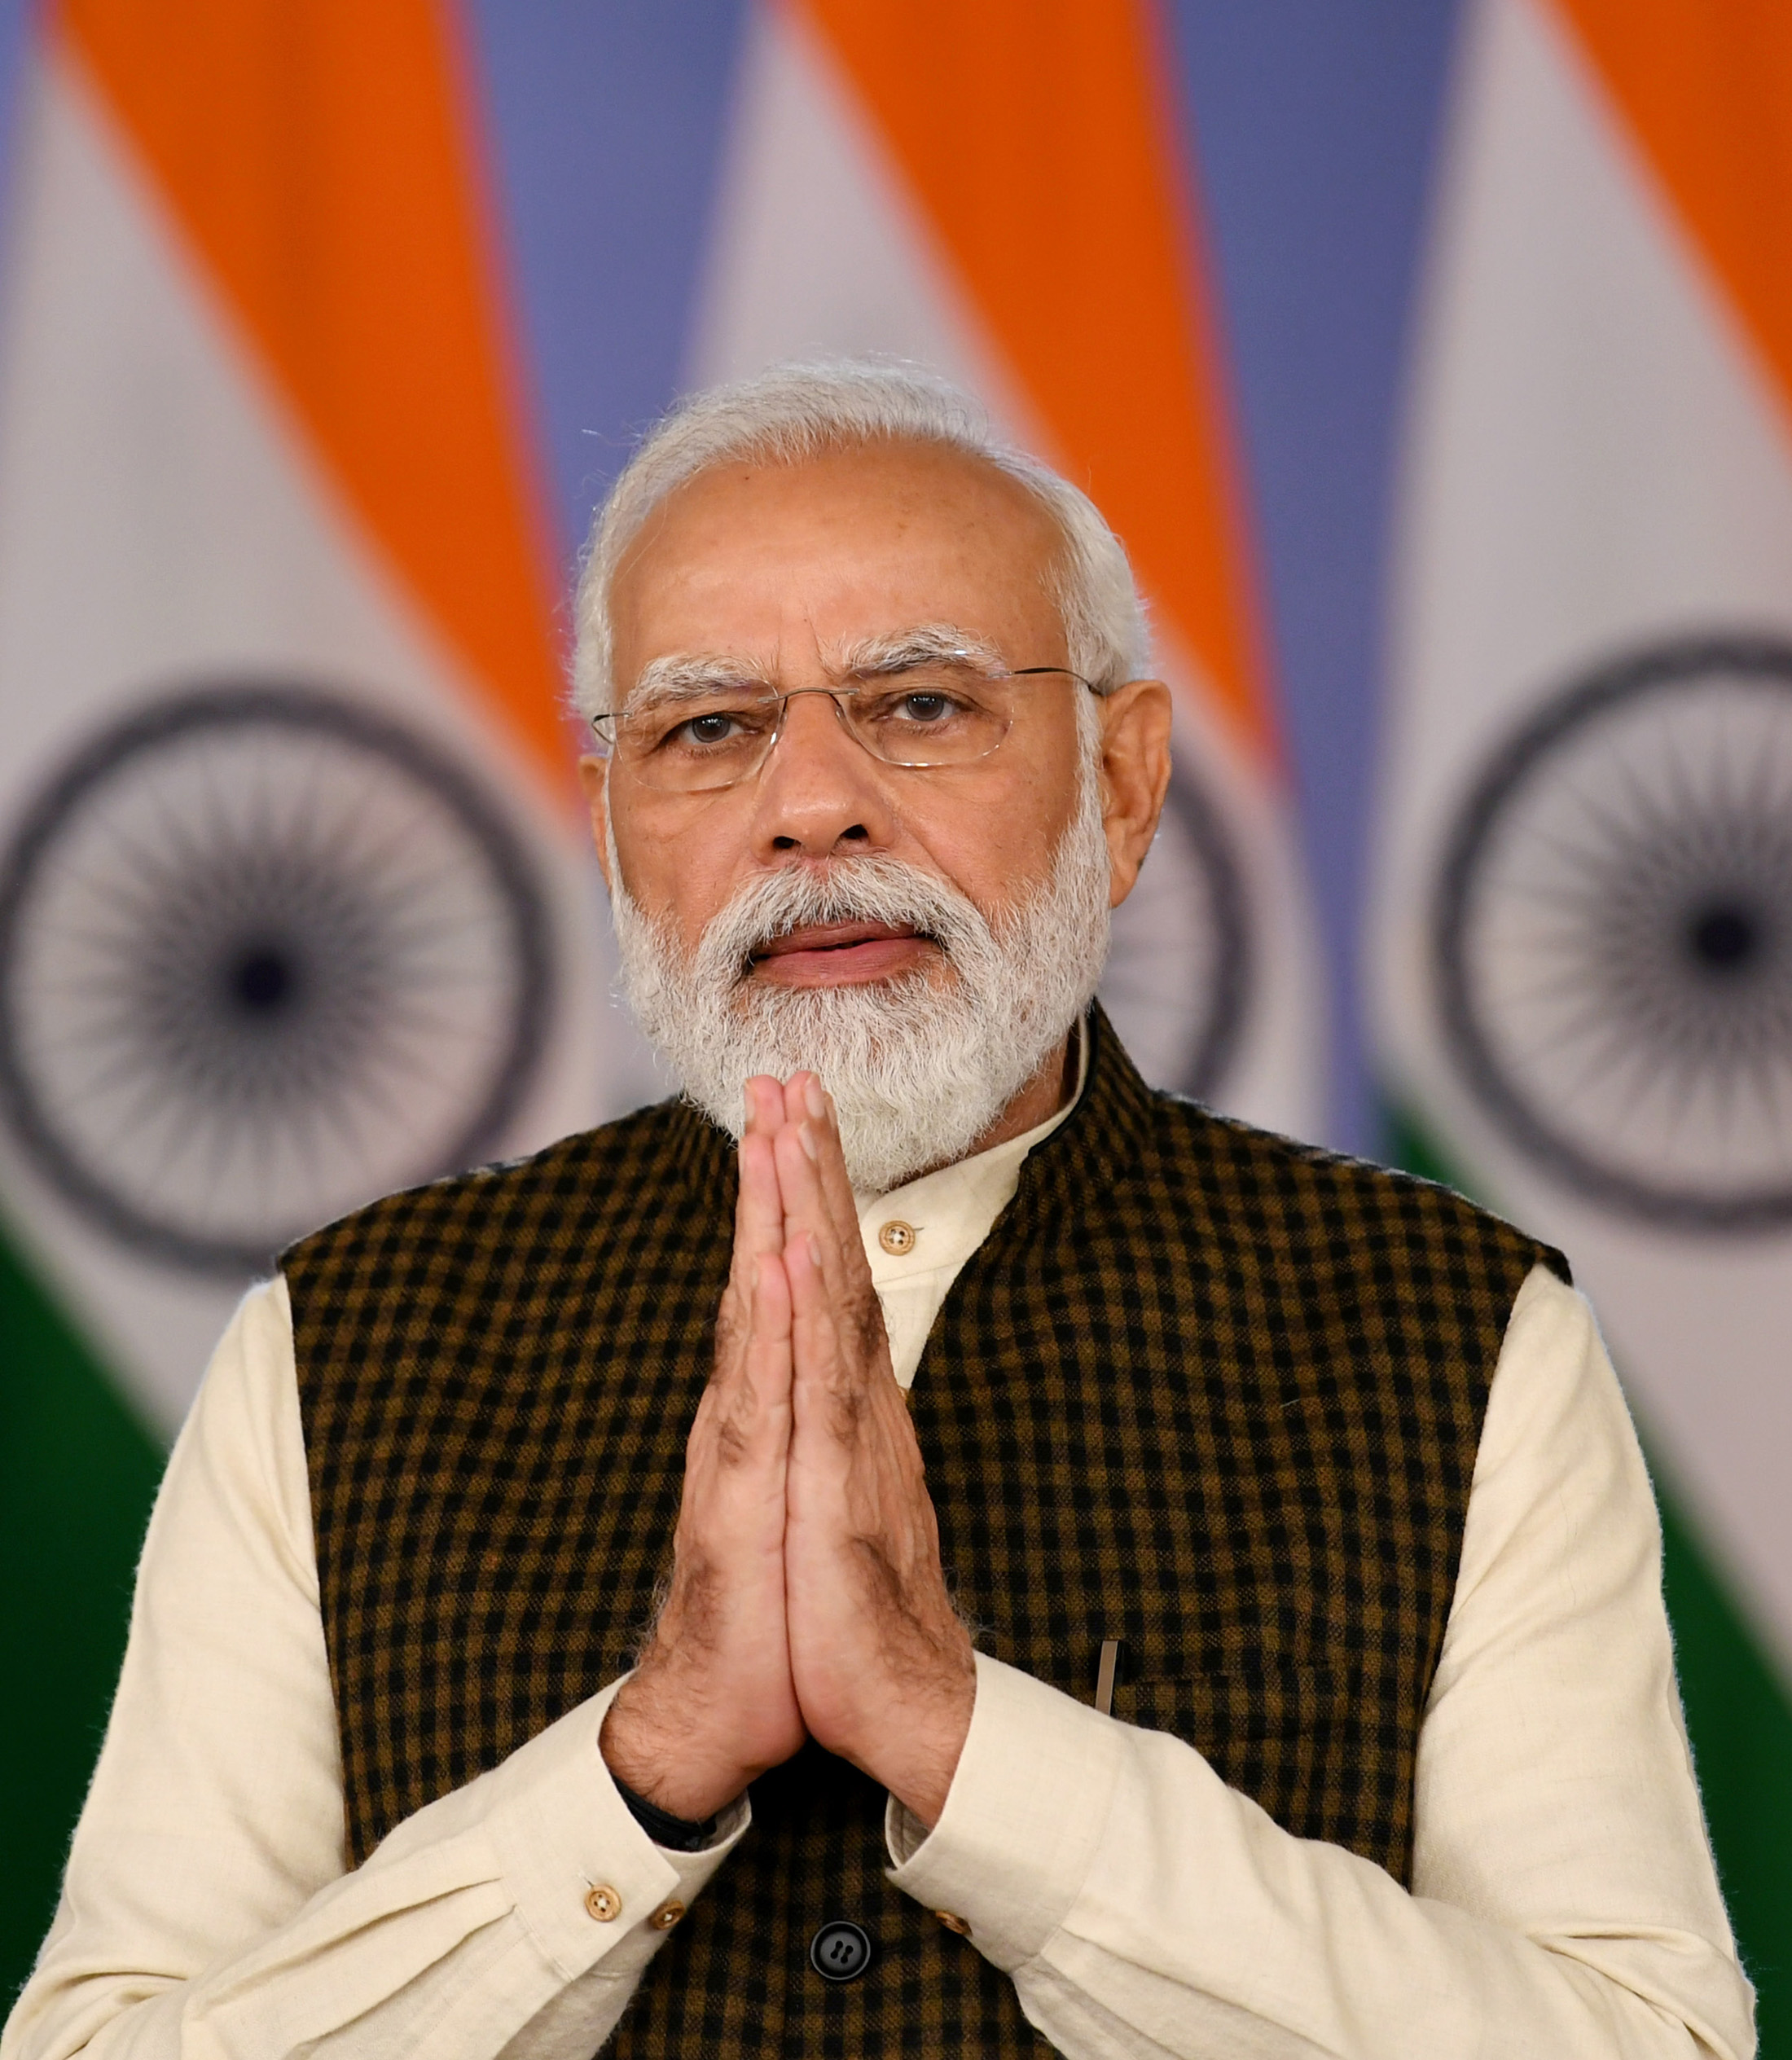 PM expresses delight after watching sisters from Arunachal Pradesh sing a Tamil patriotic tune